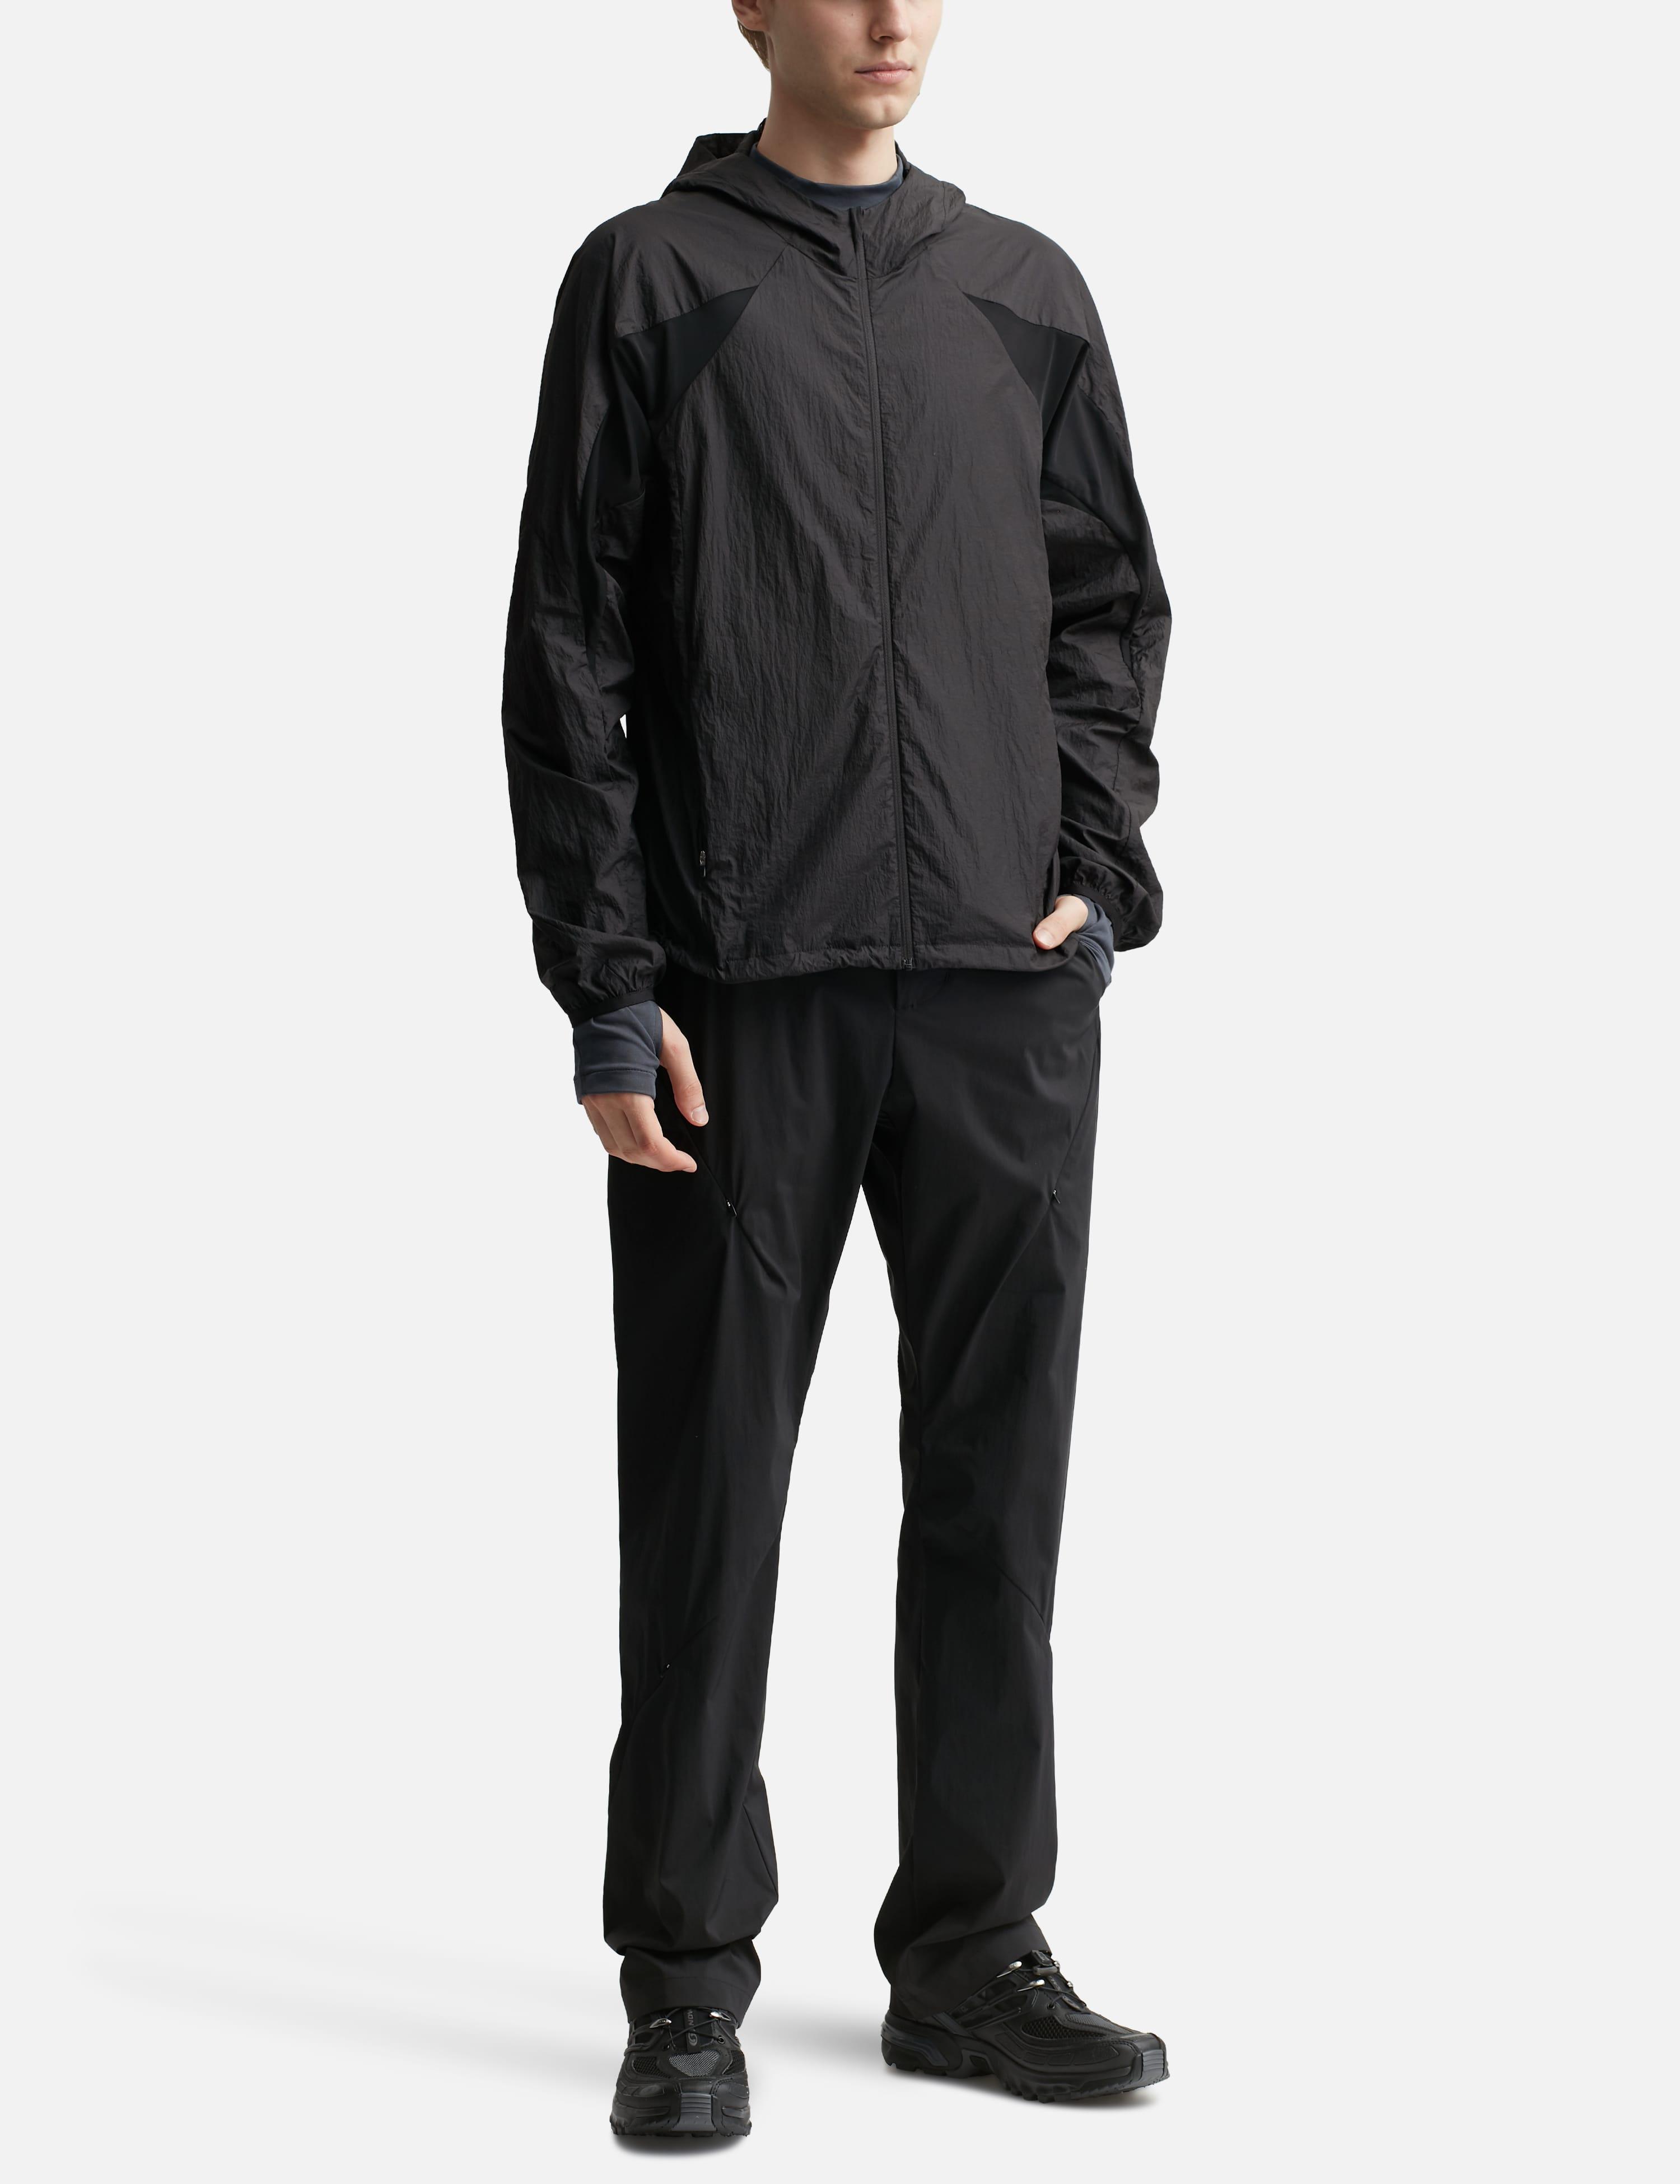 Post Archive Faction PAF 5.0+ Technical Jacket Right in Black for Men Lyst